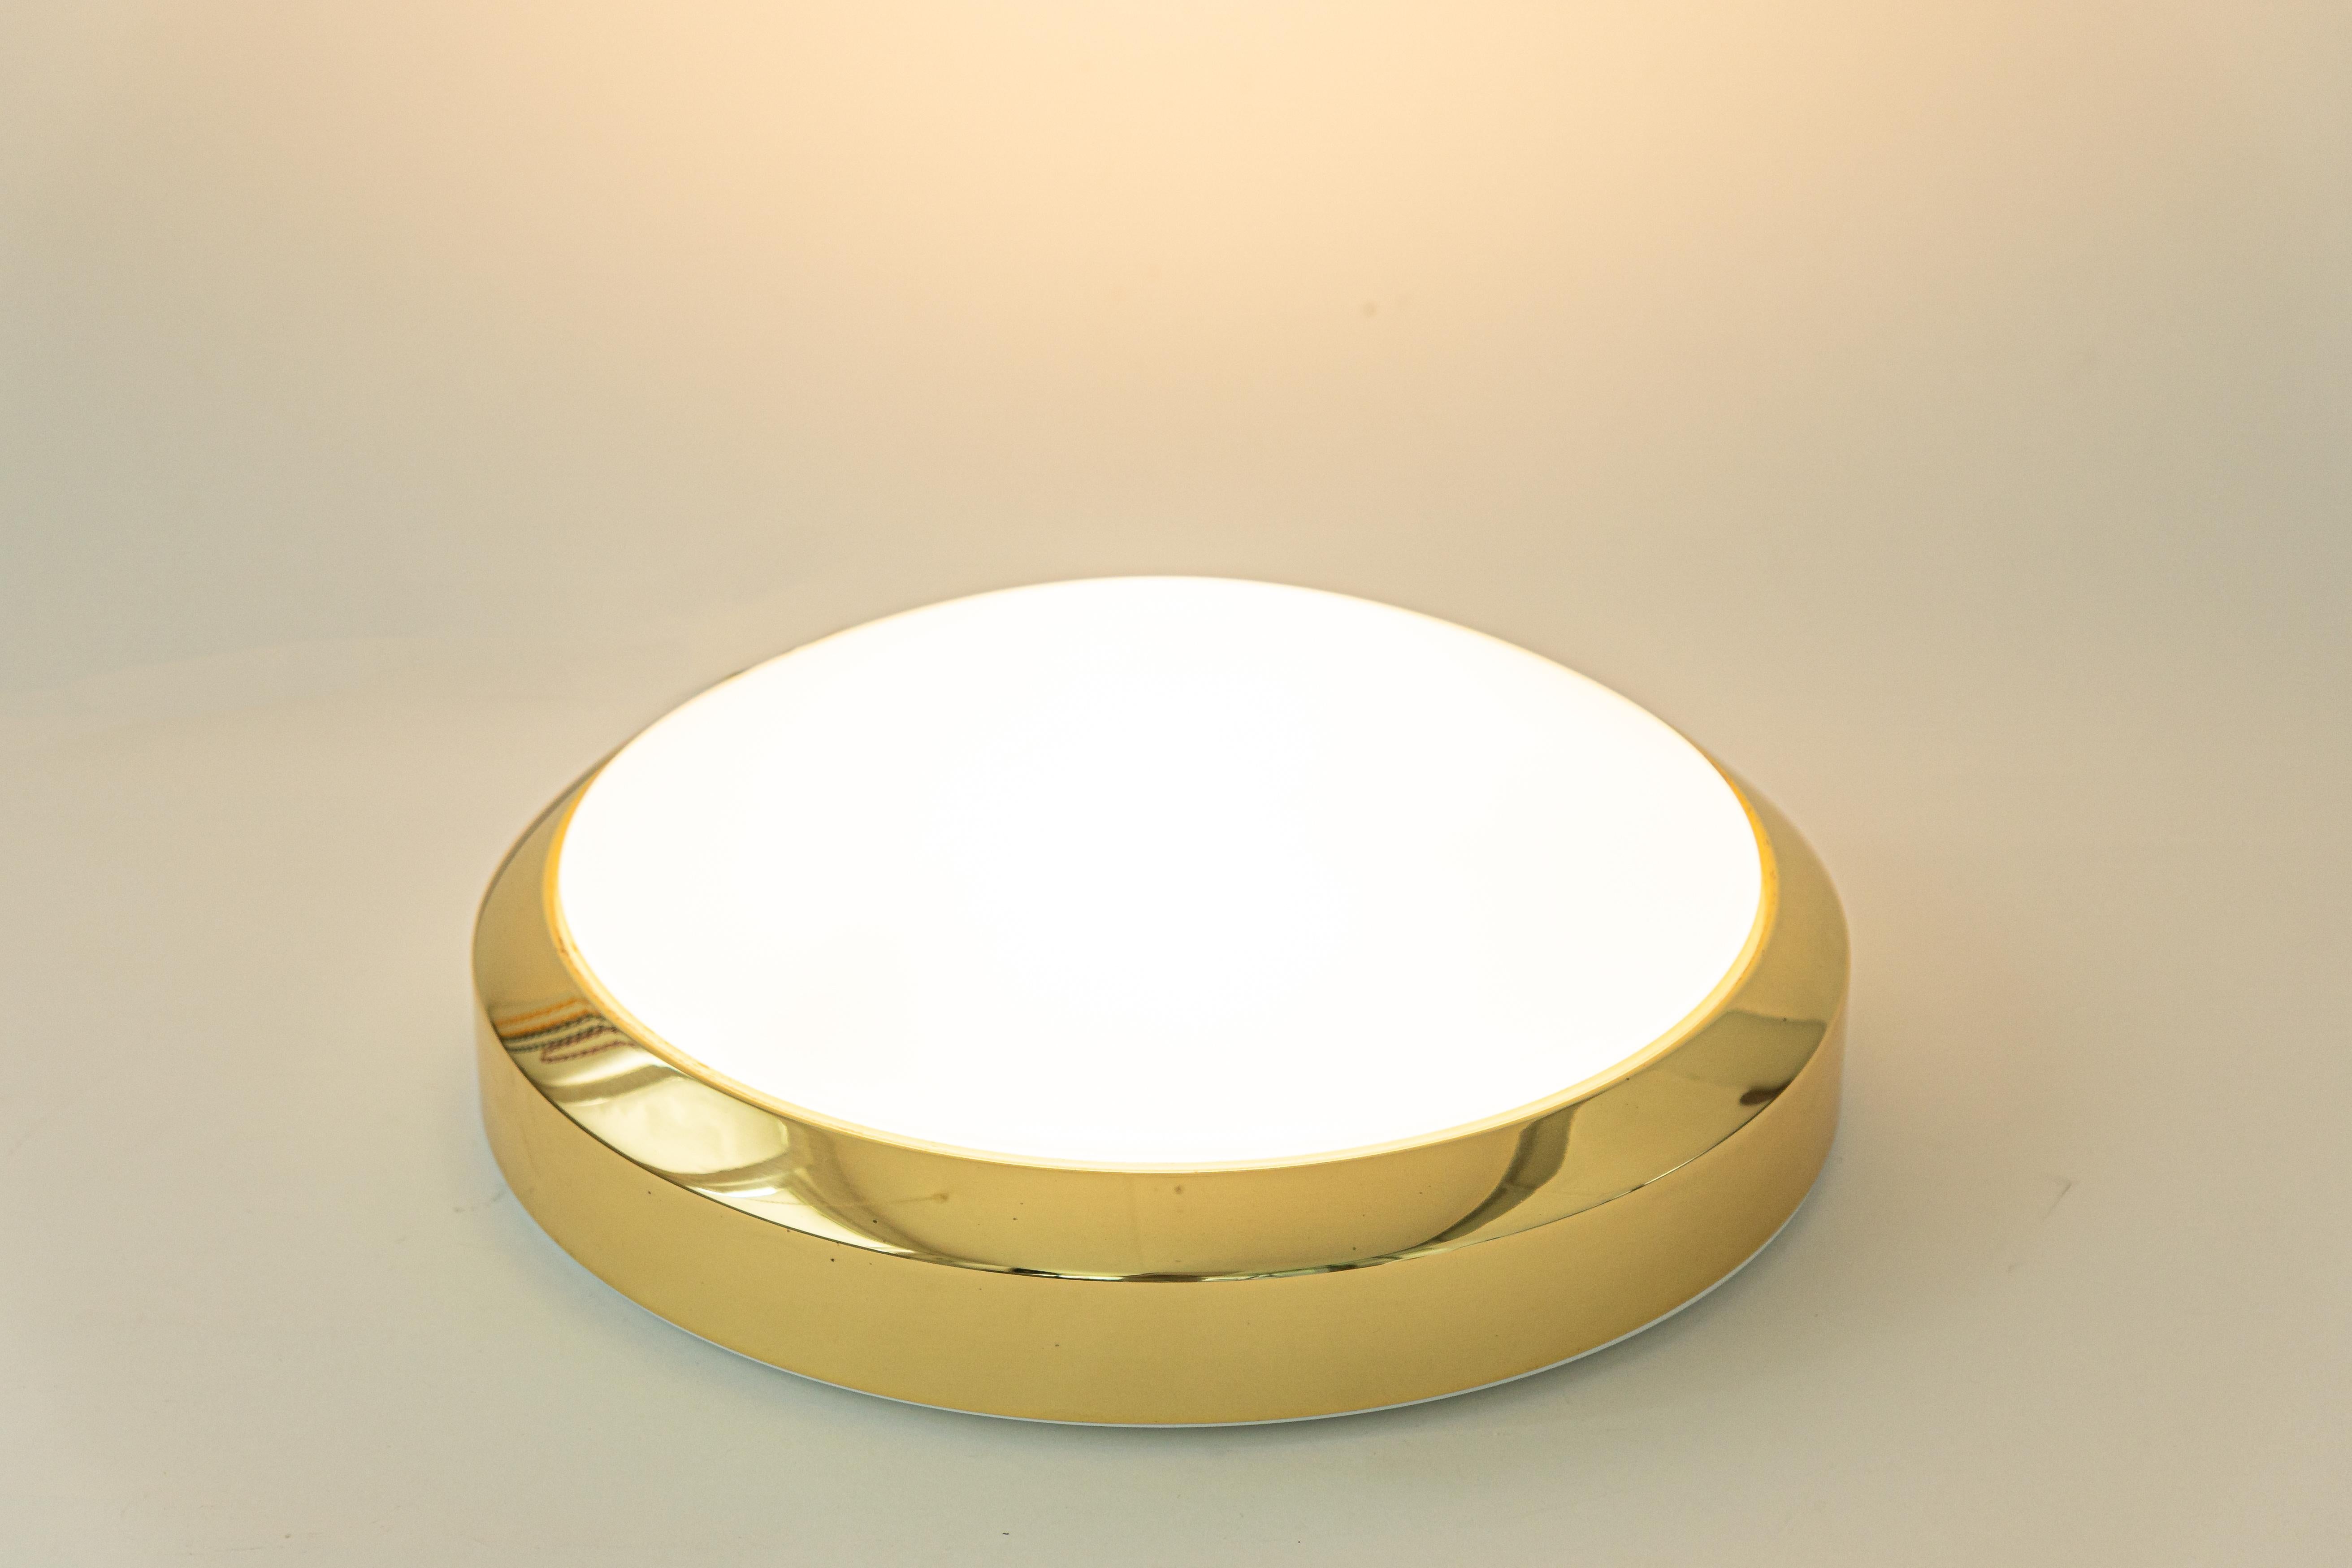 Stunning midcentury ceiling or wall light, by Glashütte Limburg, Germany, 1970s.
Made of glass and brass metal frame.
Sockets: It needs 2 x E27 standard bulb.
Light bulbs are not included. It is possible to install this fixture in all countries